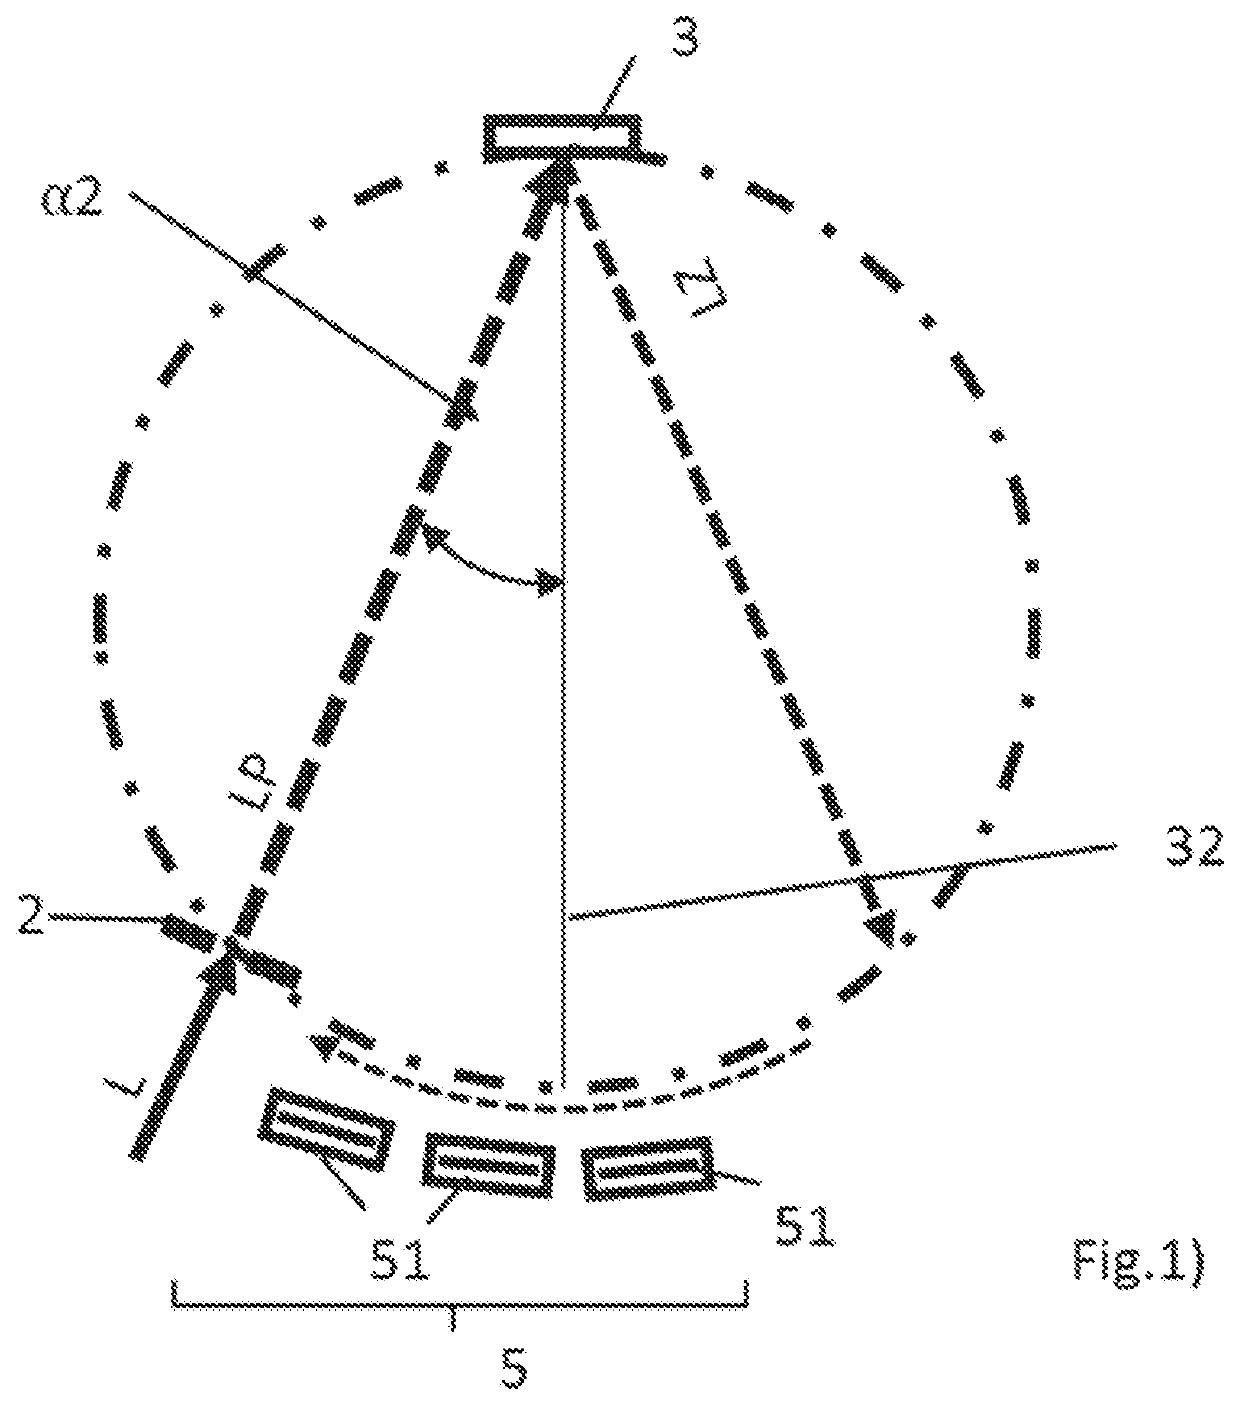 Optical system for spectrometers